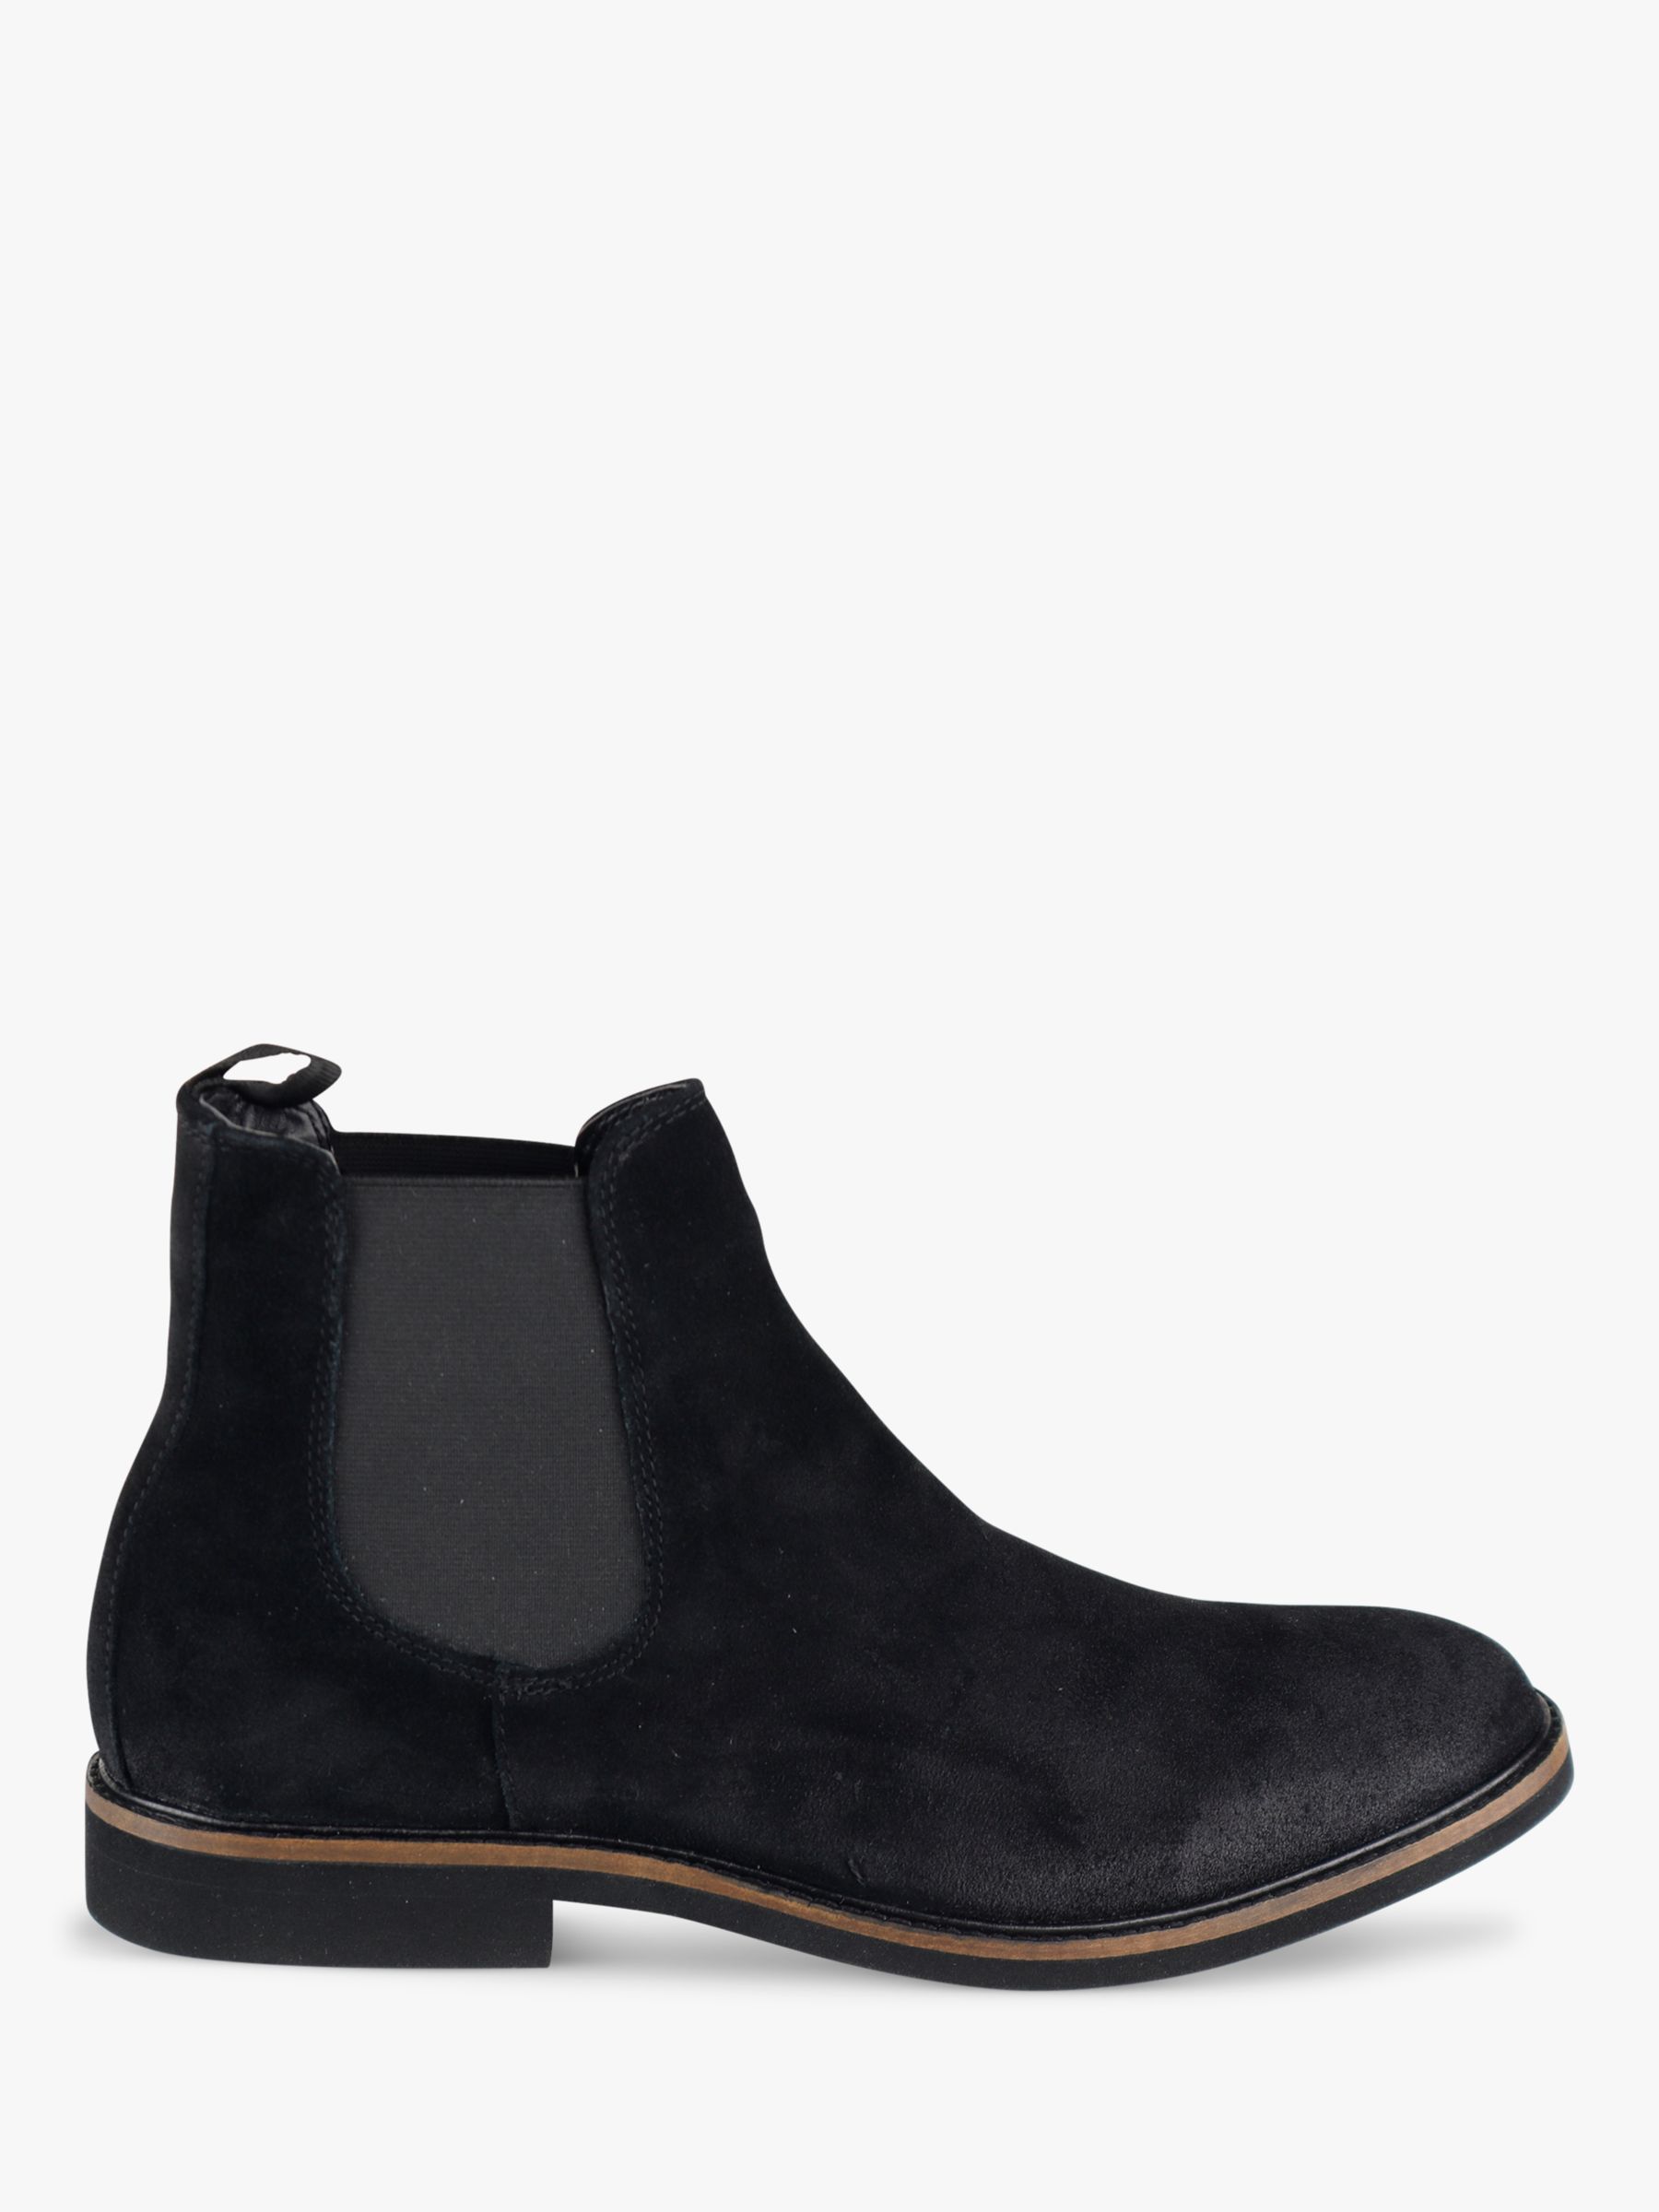 Silver Street London San Diego Suede Chelsea Boots, Black at John Lewis ...